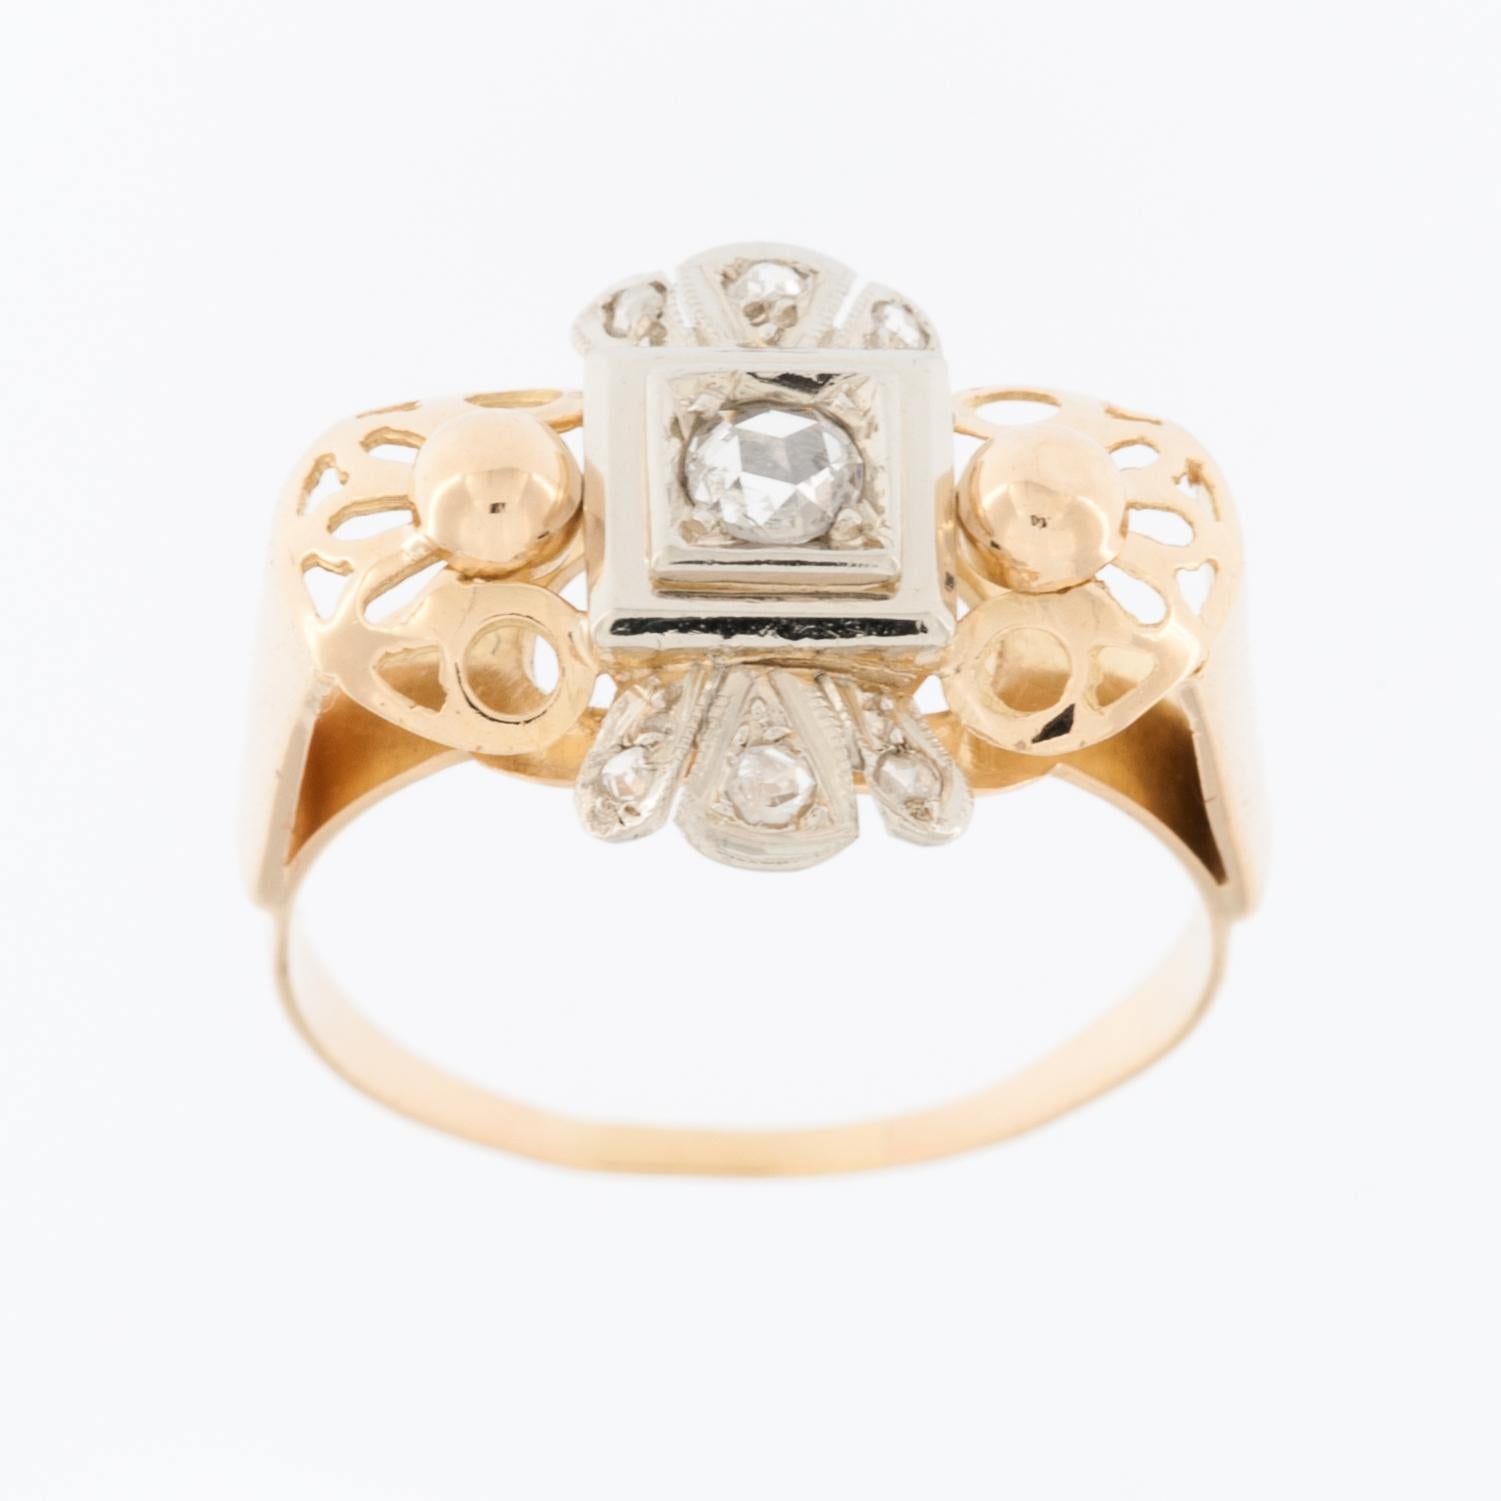 The Art Deco 18kt Yellow and White Gold Ring with Diamonds is a stunning piece of jewelry that reflects the elegance and geometric aesthetic of the Art Deco movement, which flourished in the 1920s and 1930s.

The ring is crafted from 18-karat yellow